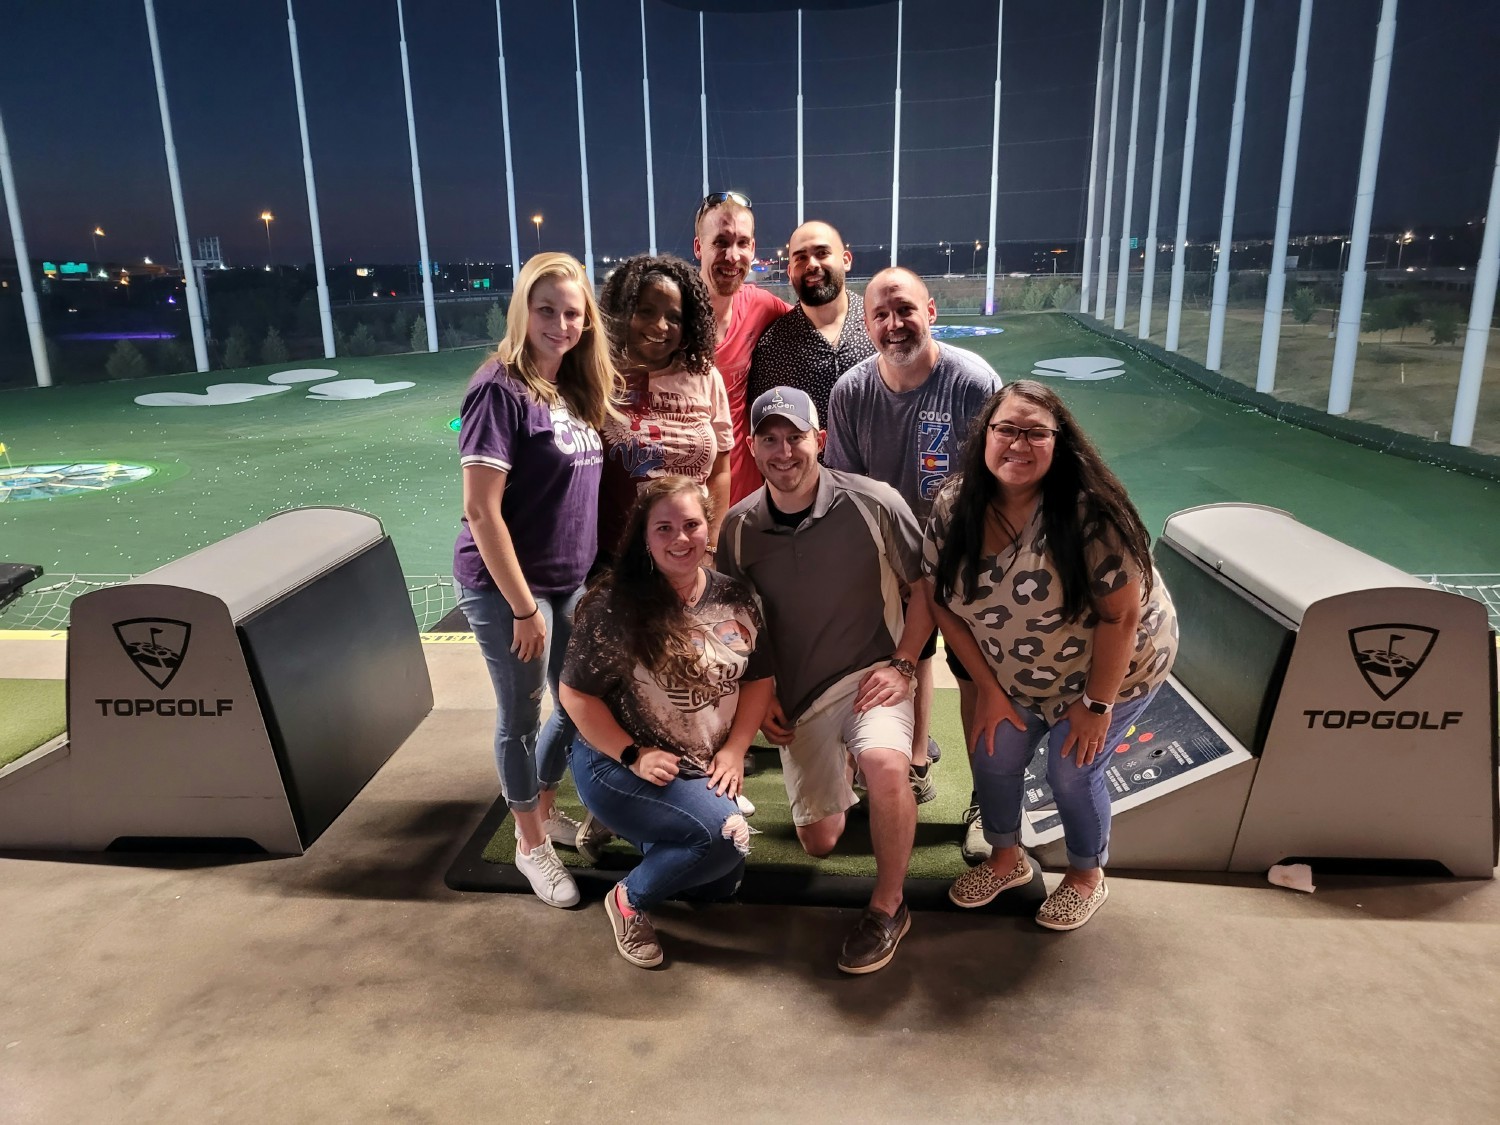 Top Golf night with the team.